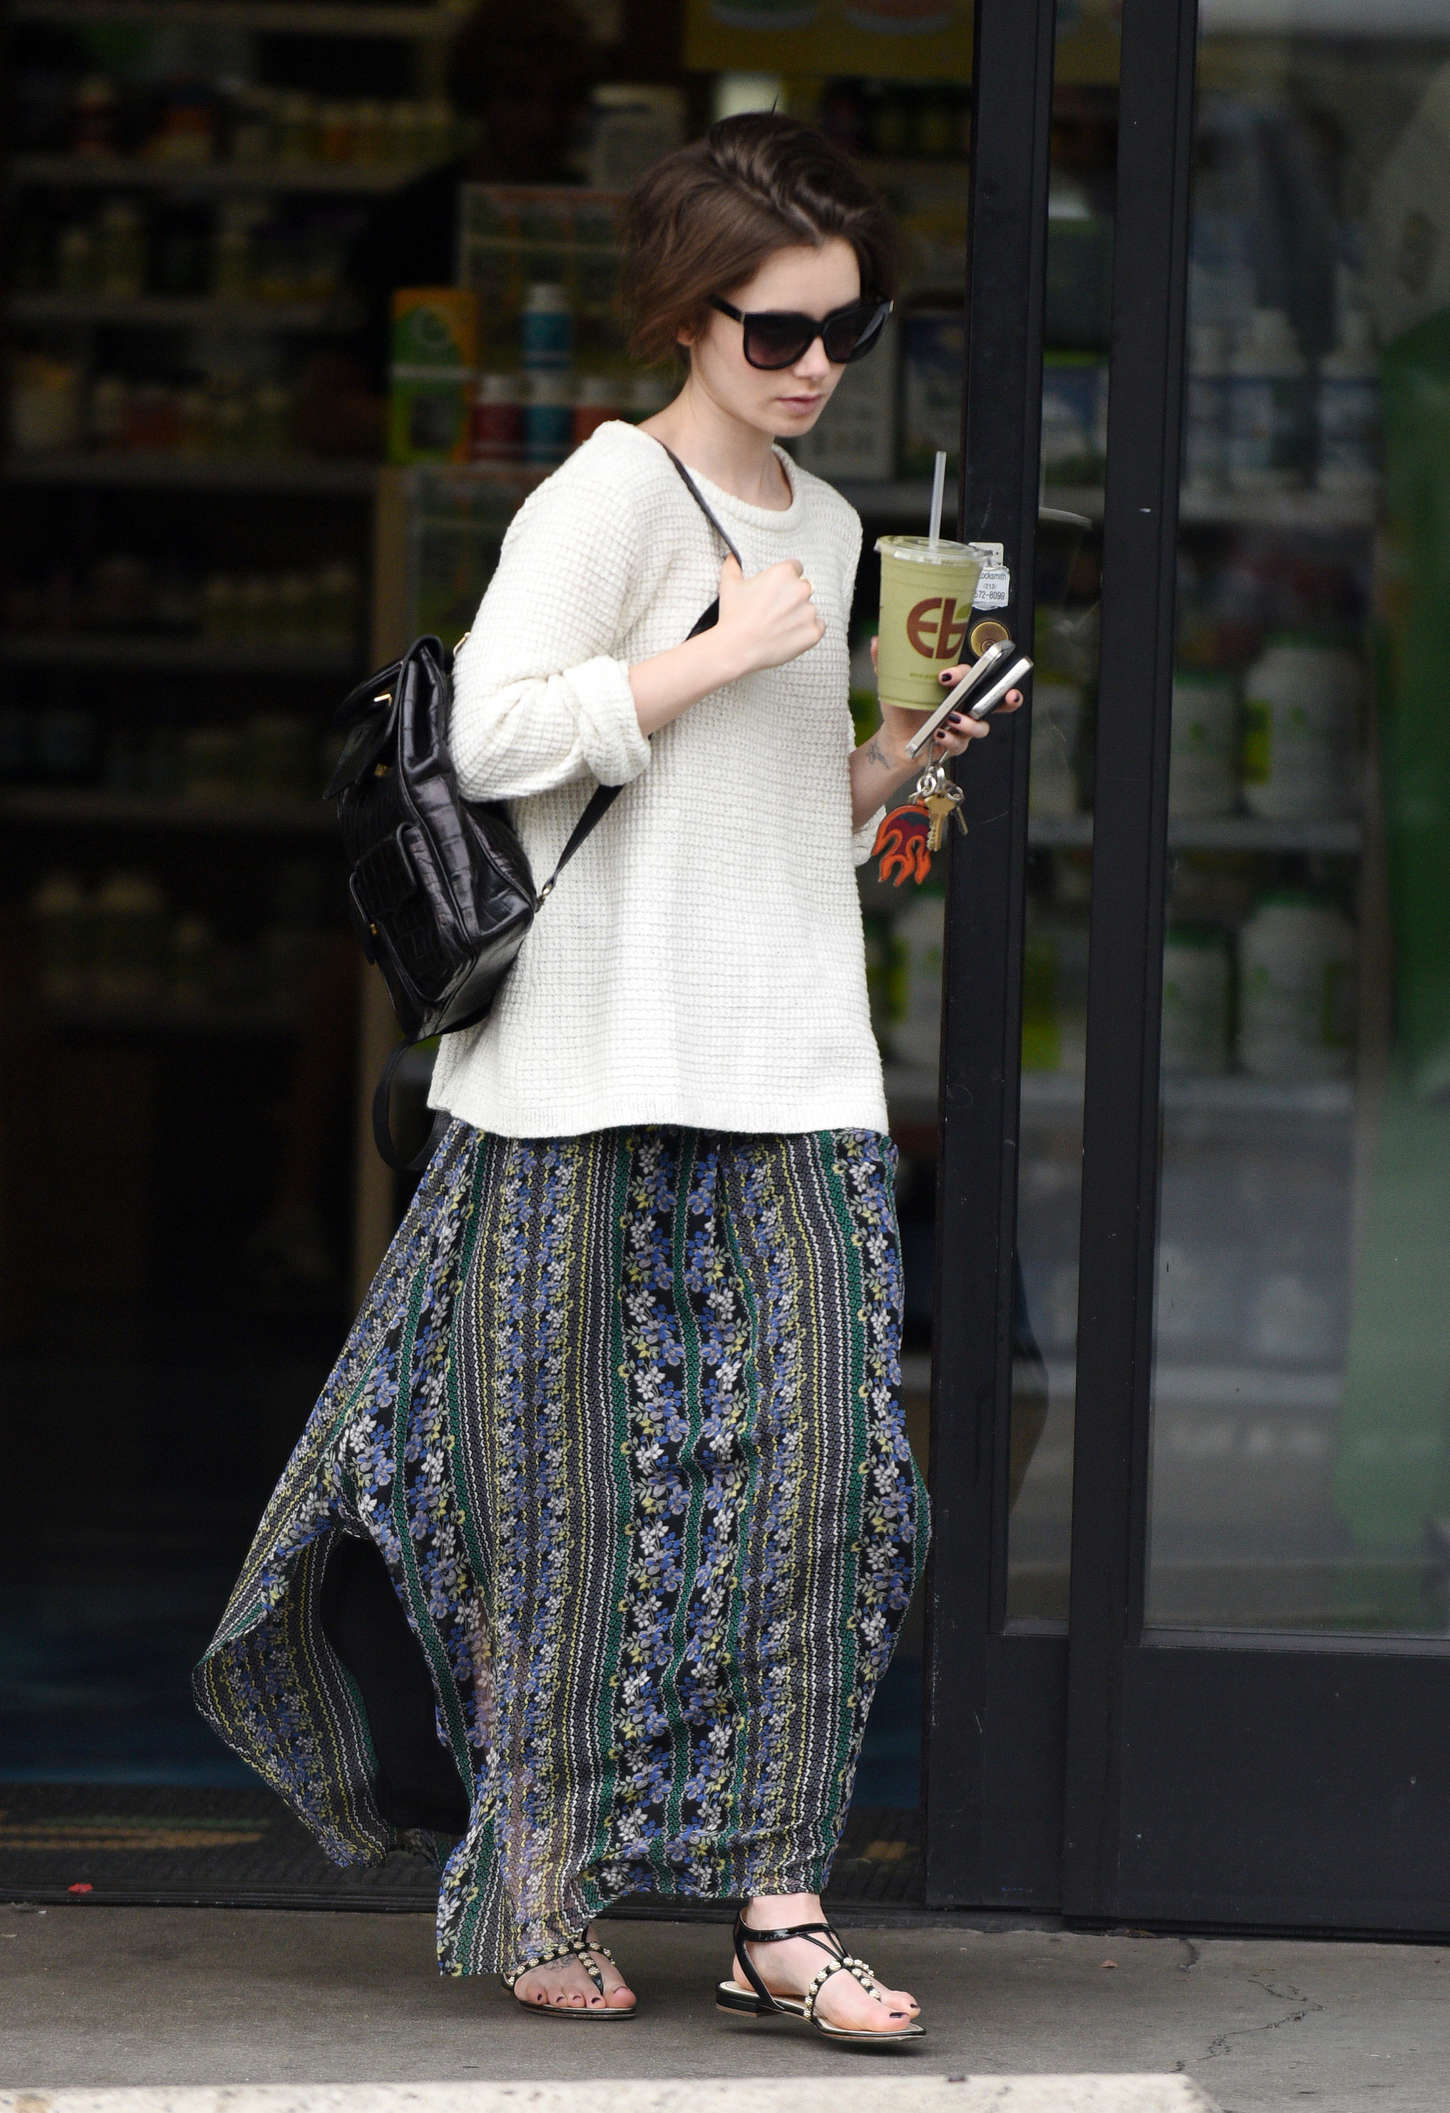 Lily Collins in Long Skirt -05 | GotCeleb